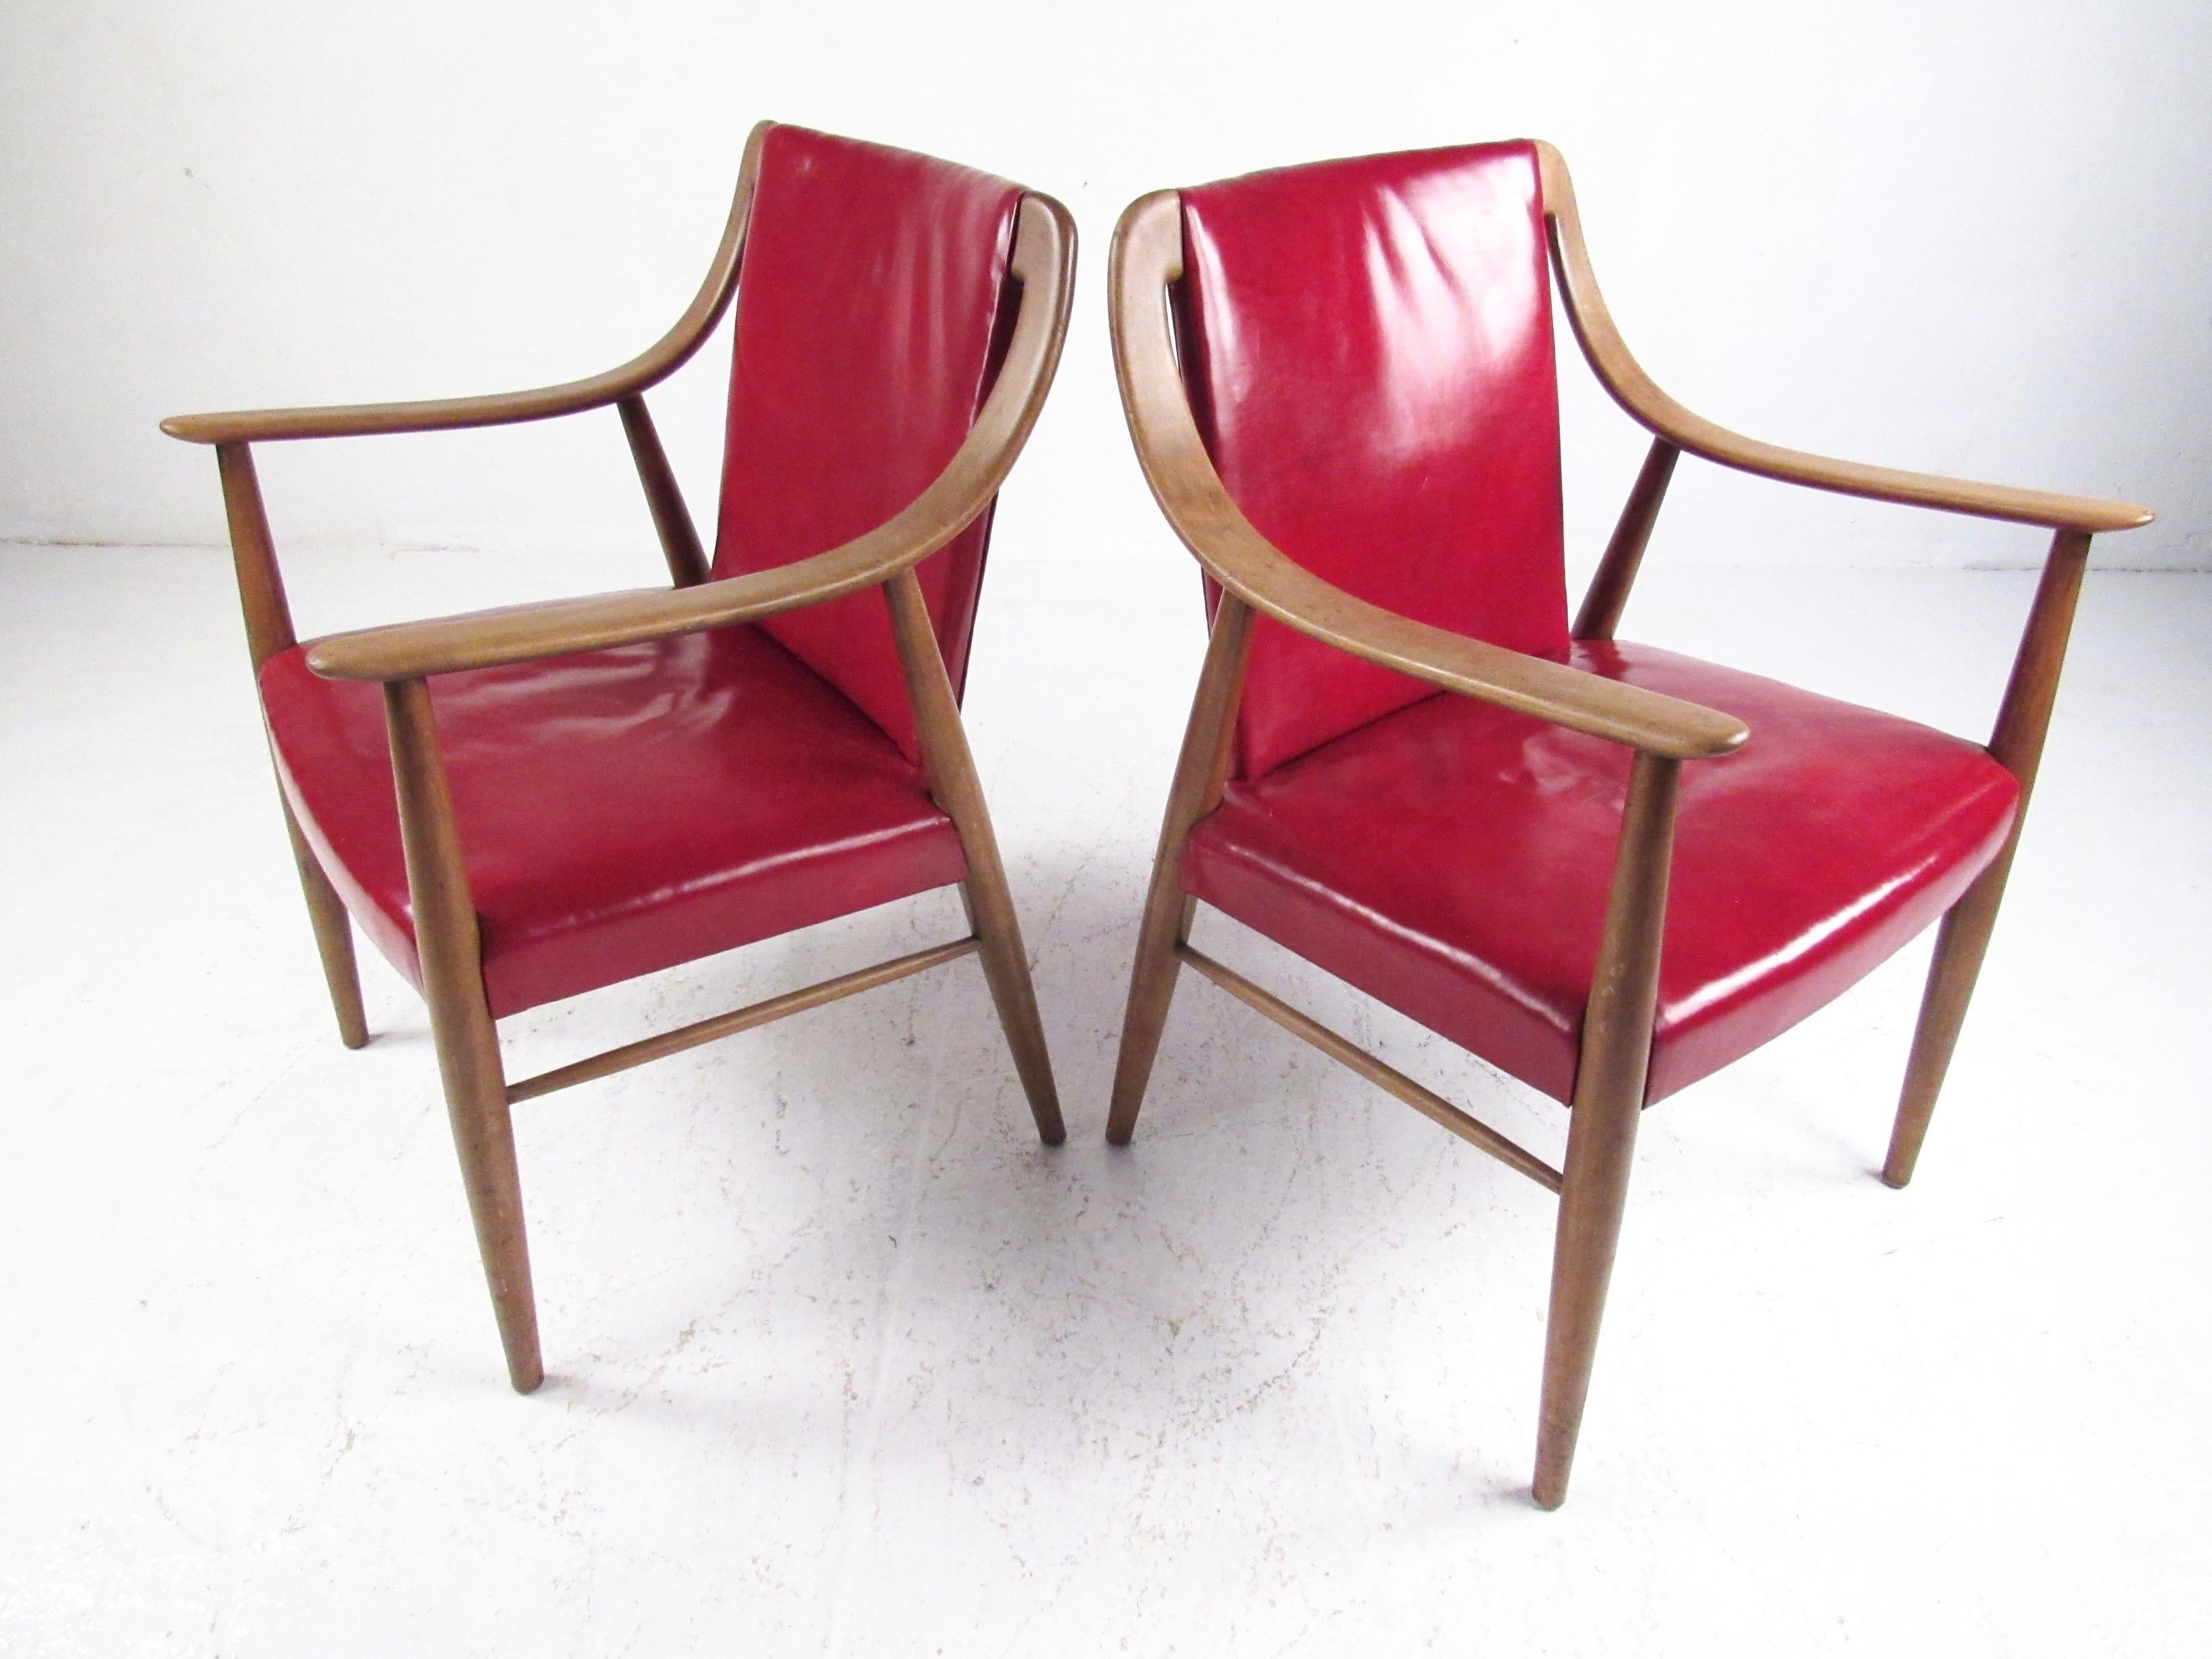 This stylish pair of Scandinavian Modern side chairs feature vintage red leather upholstery and sculpted solid wood frames. The unique Mid-Century Modern appeal of these Peter Hvidt style arm chairs make a great addition to home or office seating.